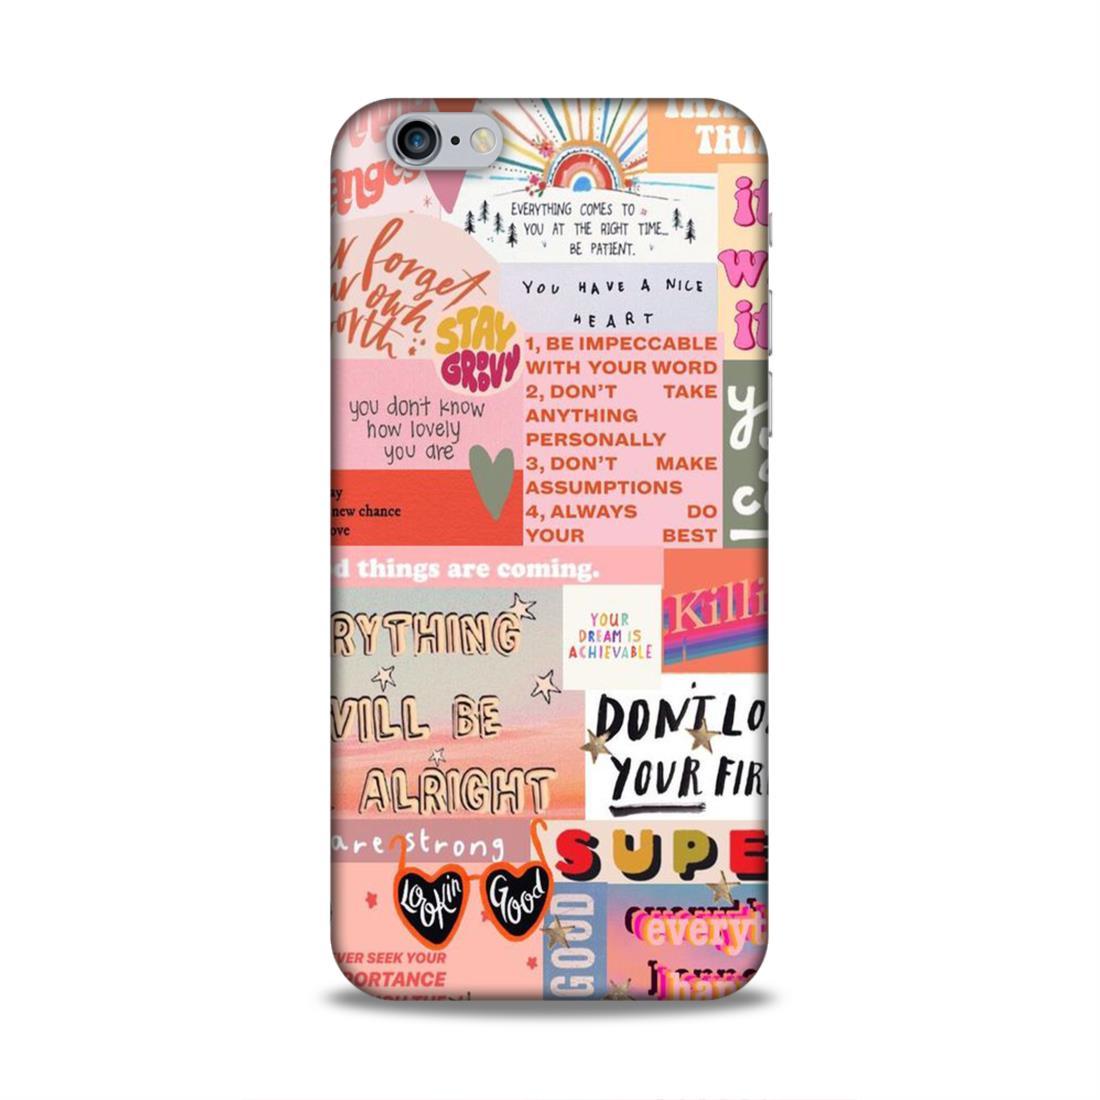 Have A Nice Heart iPhone 6s Phone Cover Case